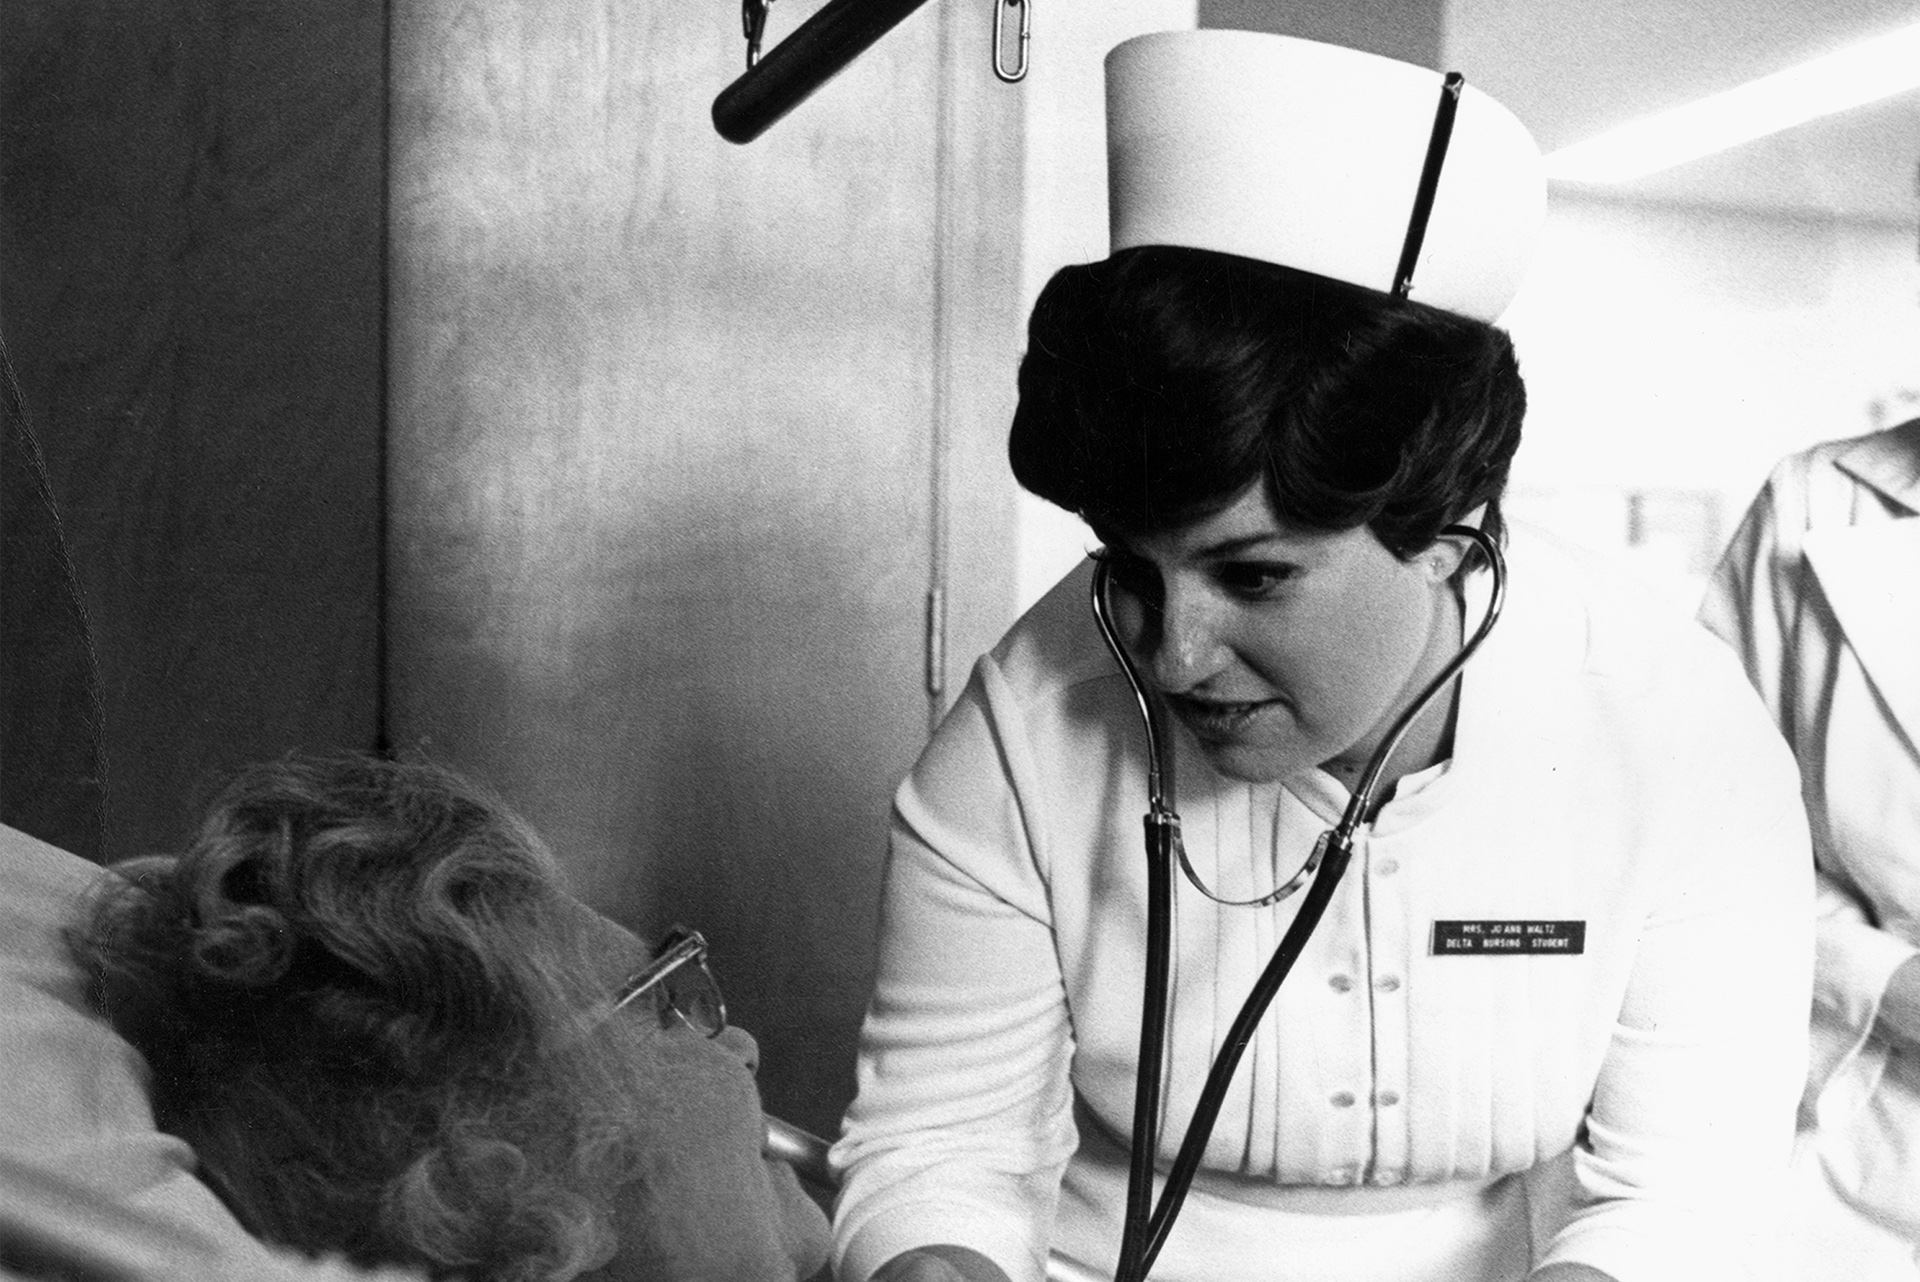 Nursing student in the 1960s